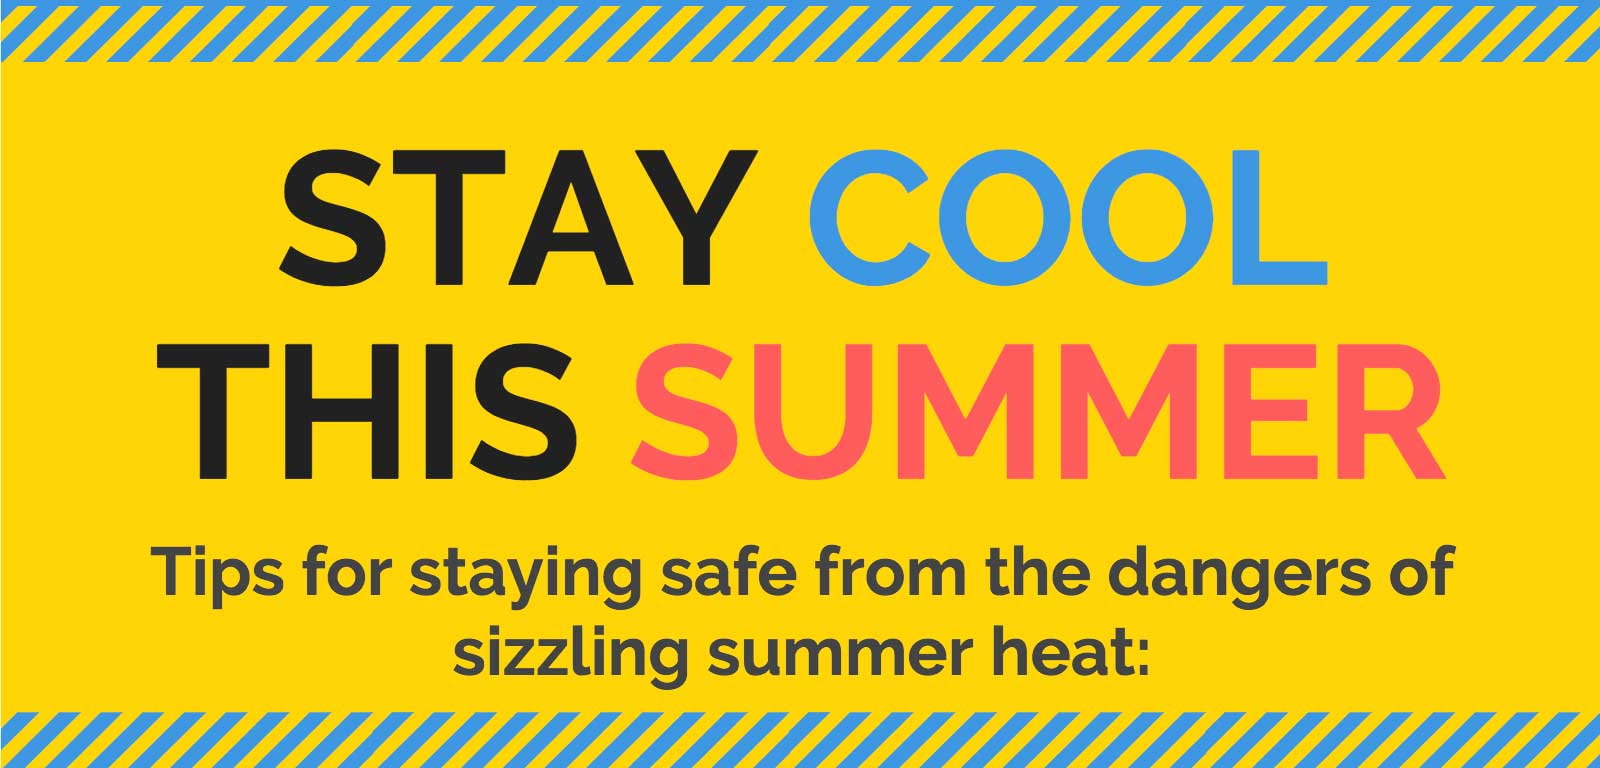 Title of Infographic "Stay Cool This Summer: Tips for staying safe from the dangers of sizzling summer heat."